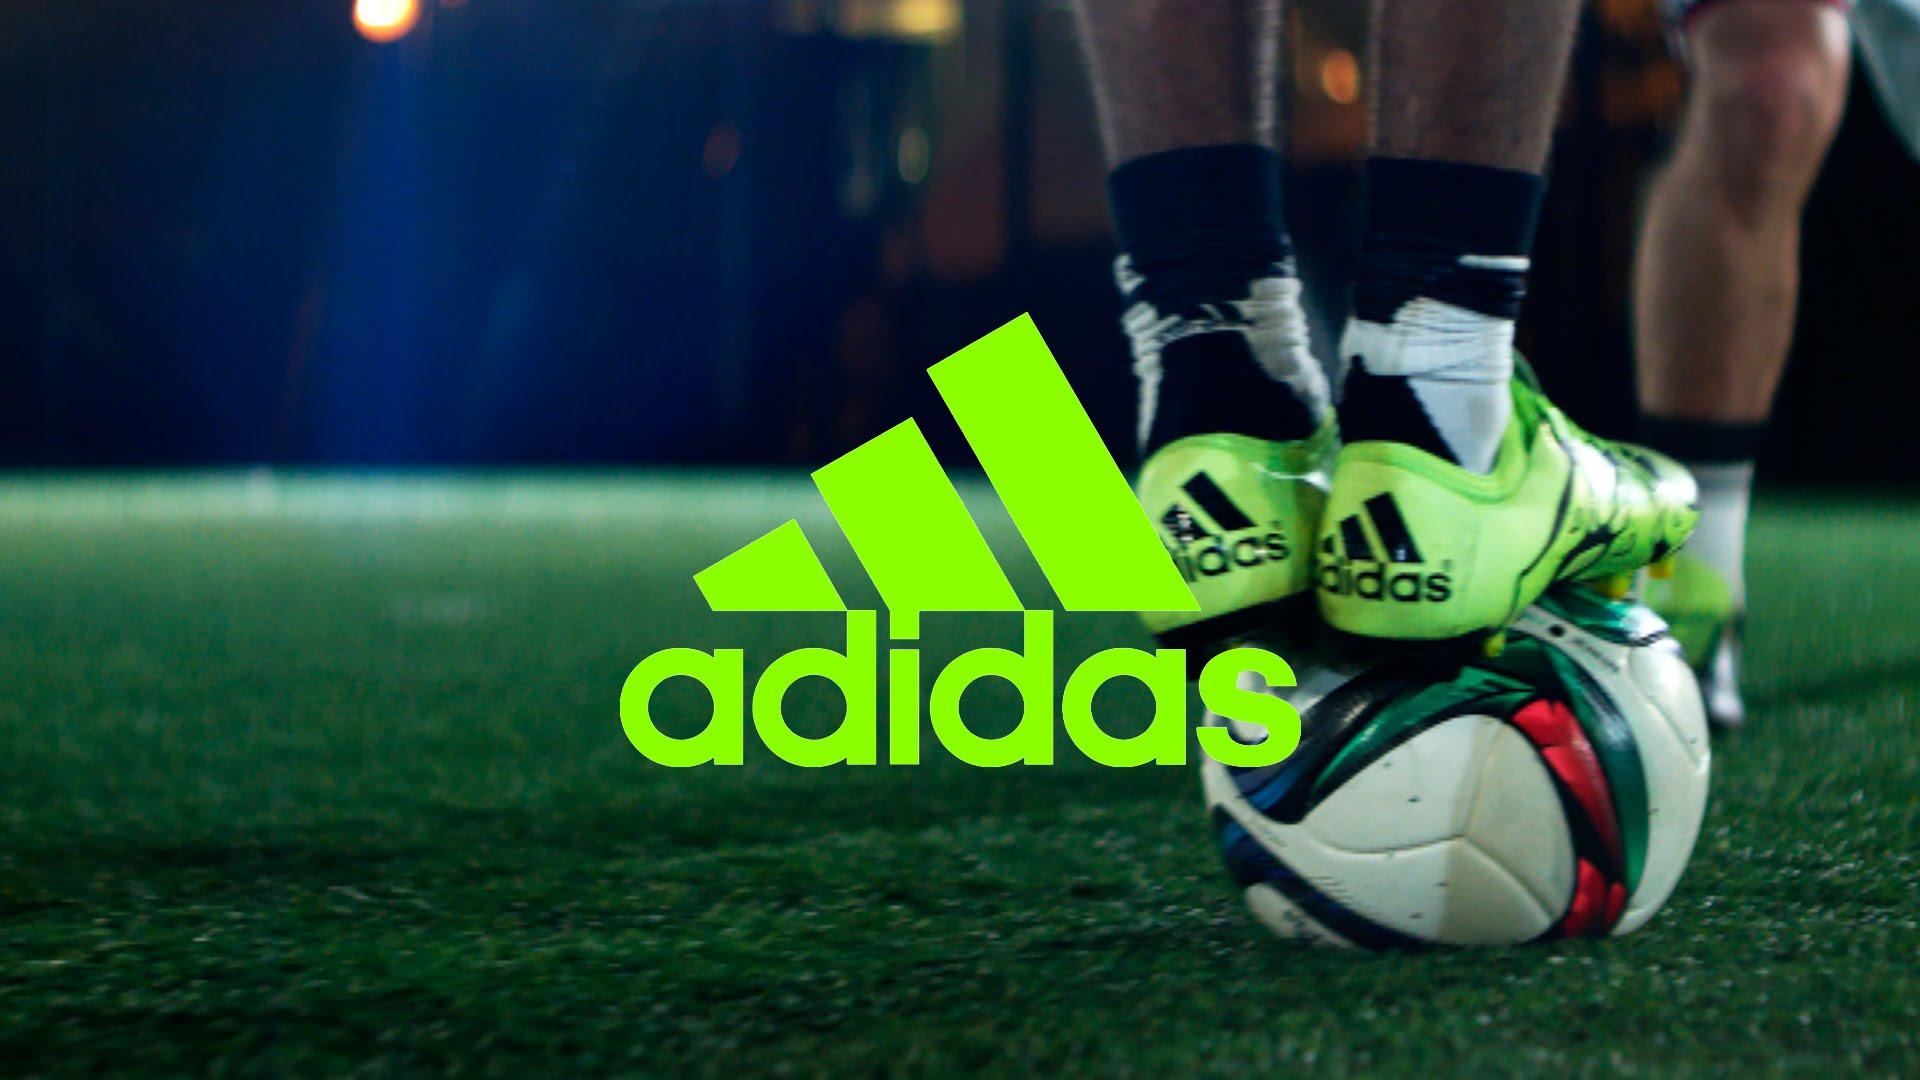 Create Your Own Game Adidas - HD Wallpaper 